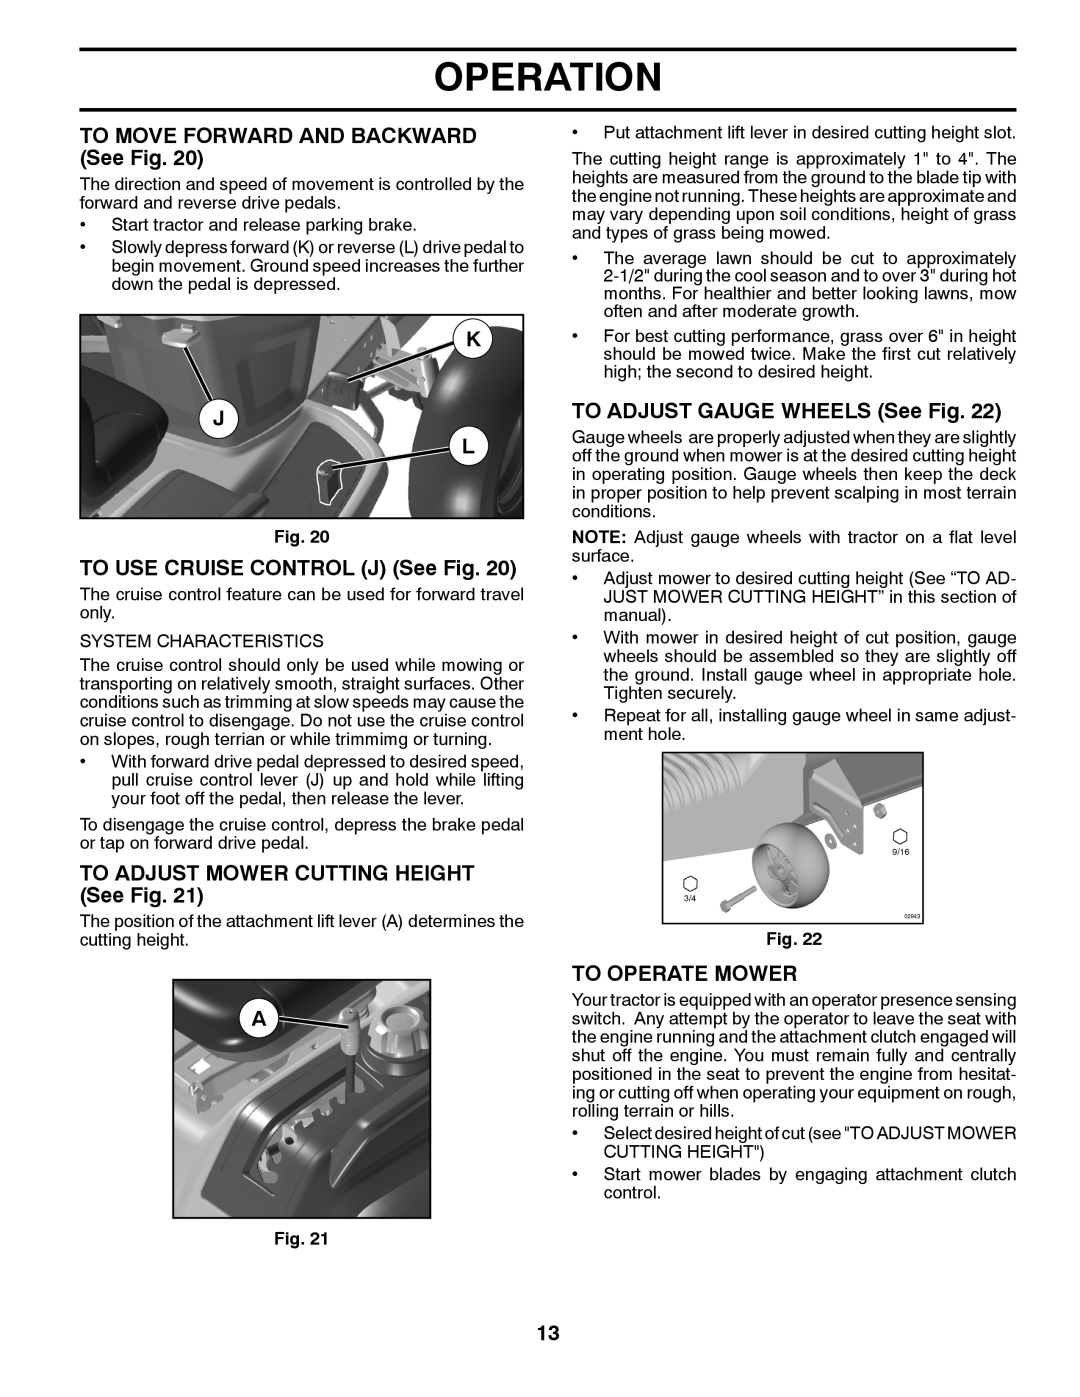 Husqvarna YTH26V54 owner manual Operation, TO MOVE FORWARD AND BACKWARD See Fig, K J L, TO USE CRUISE CONTROL J See Fig 